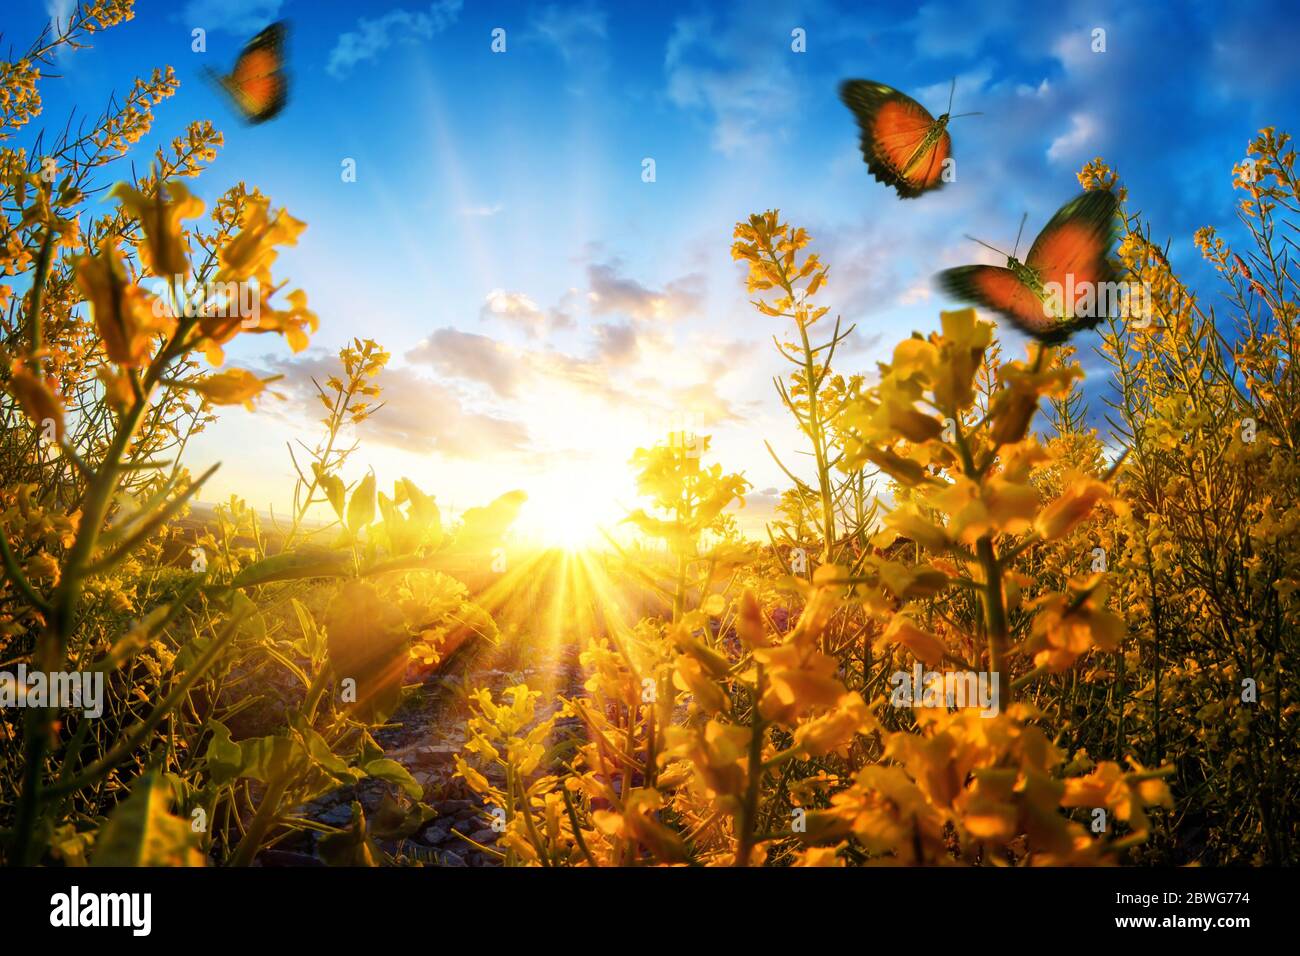 Bright rural sunset seen through blossoms on a meadow, with butterflies roaming in the air and deep blue sky Stock Photo